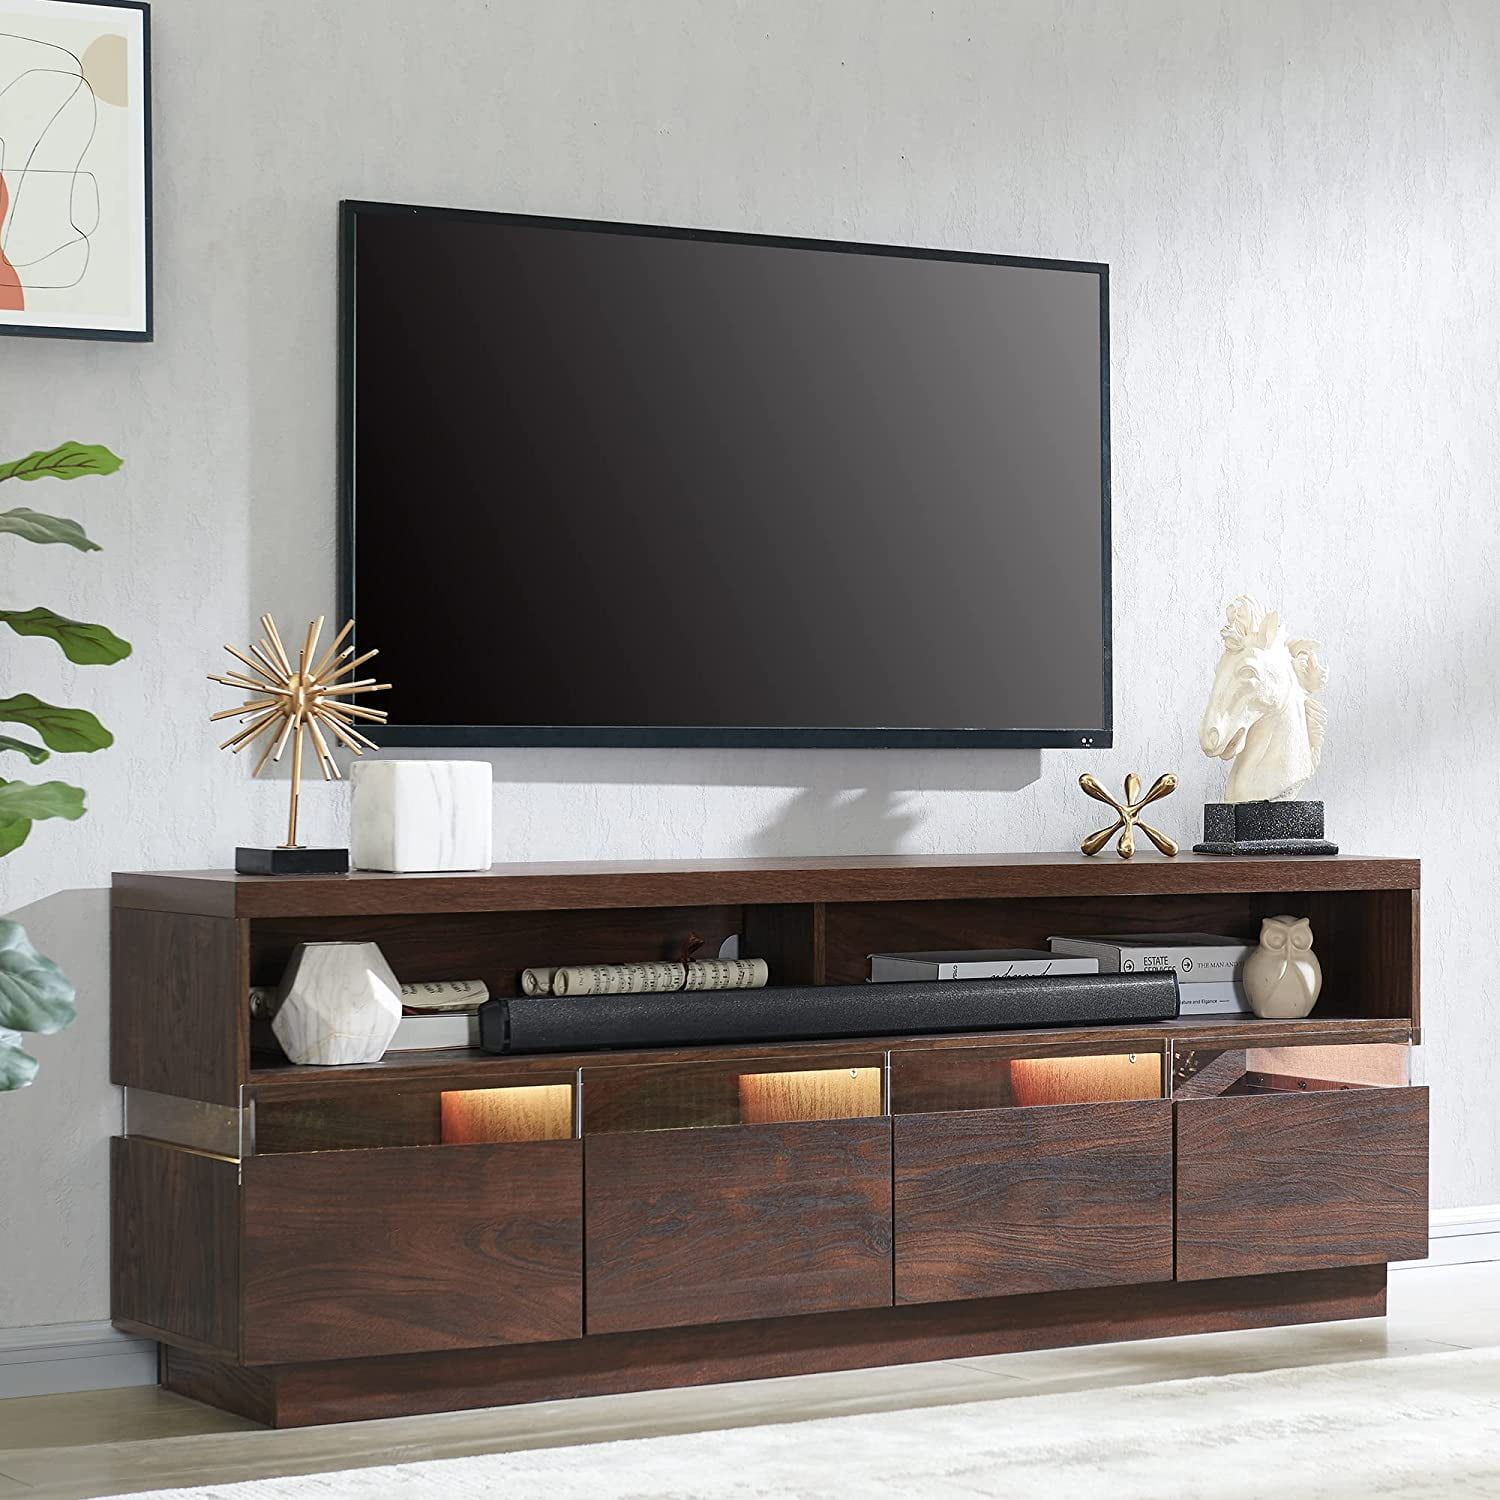 Okd Modern Wood Tv Stand For Tvs Up To 75" For Living Room With Led Lights Entertainment  Center,walnut – Walmart Inside Walnut Entertainment Centers (View 9 of 15)